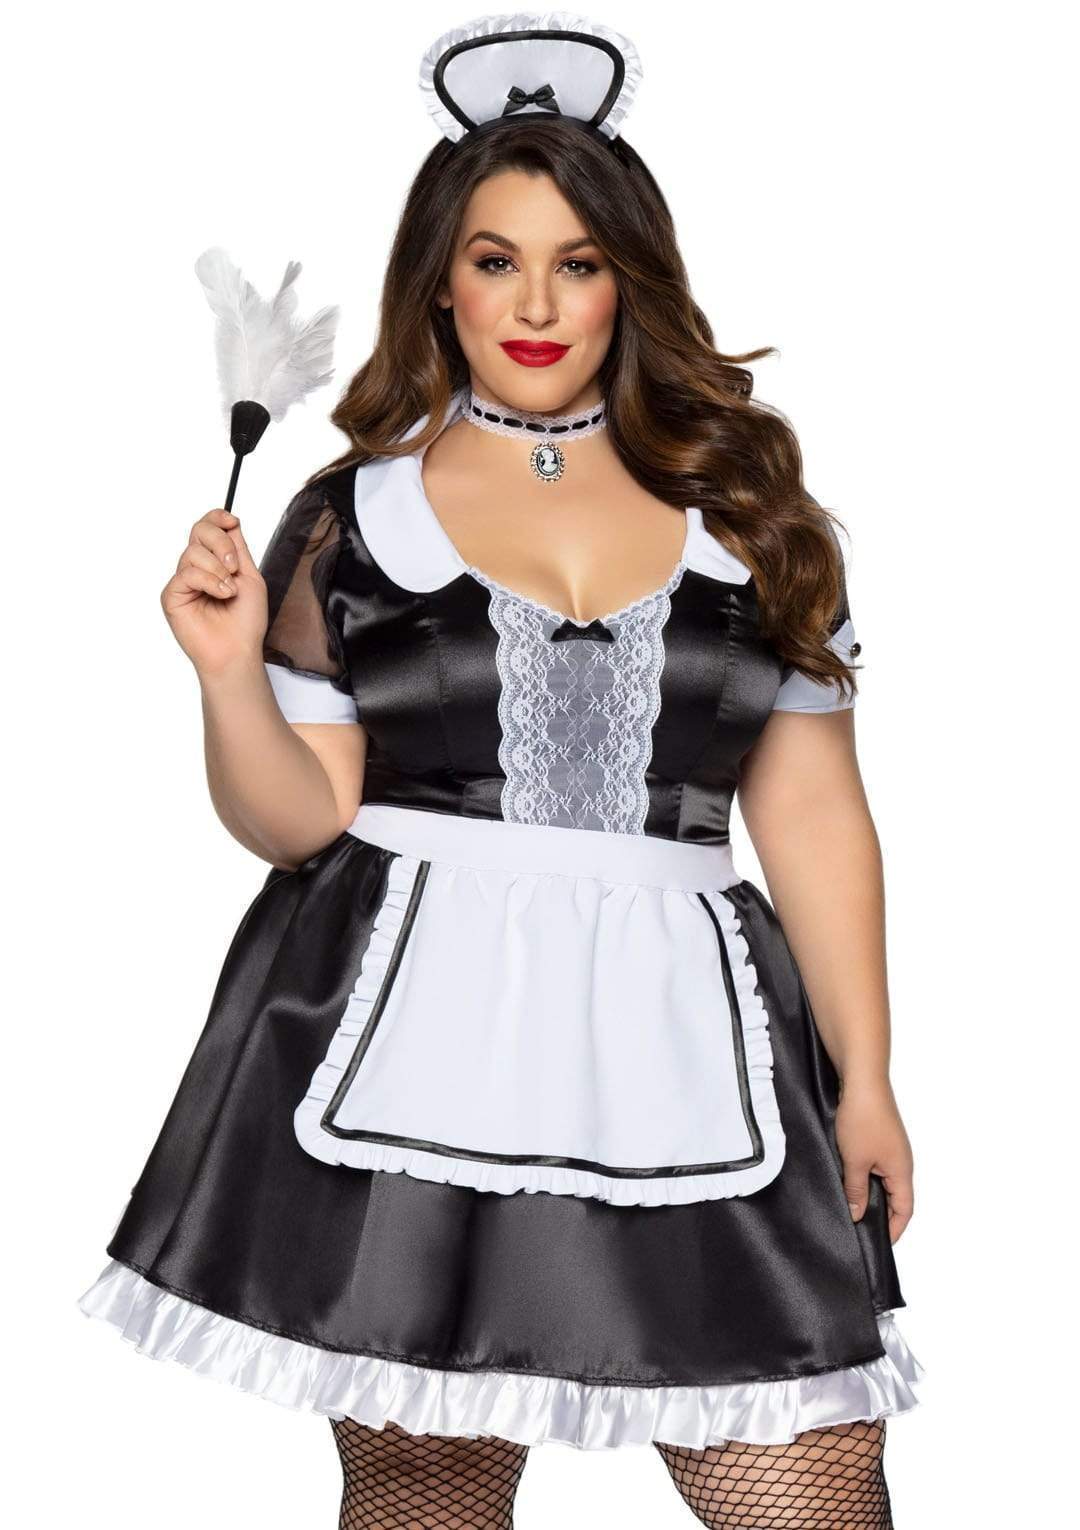 Classic French Maid Plus Dress with Lace Trim and Cameo Choker Collar